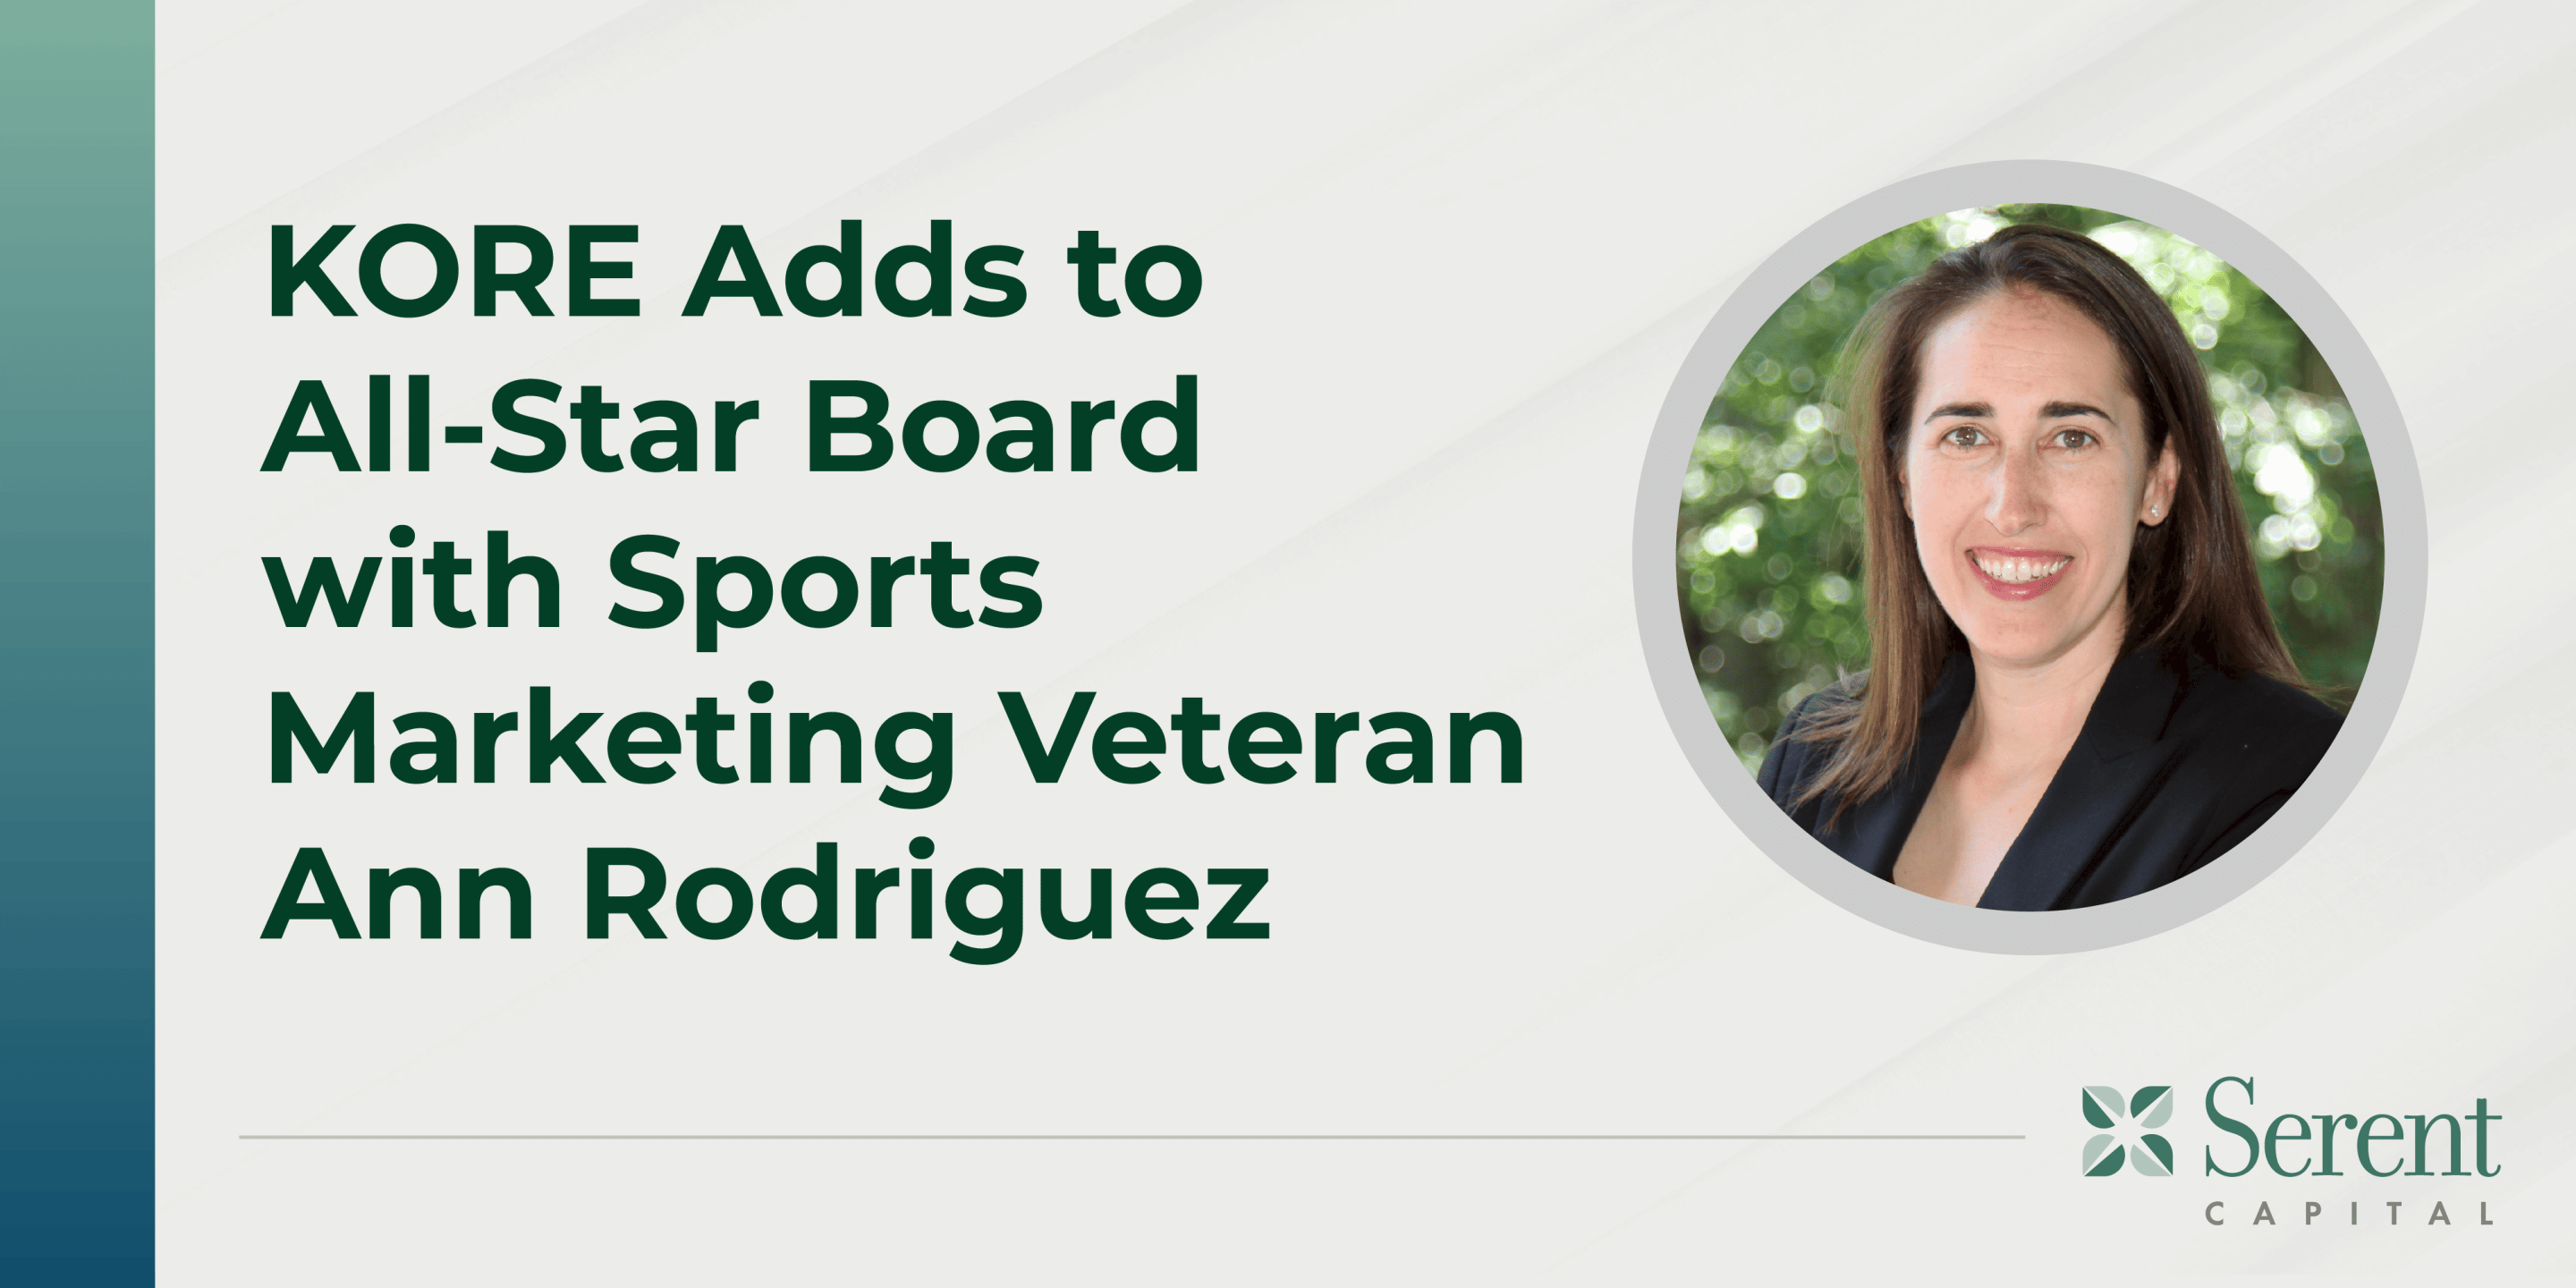 KORE Software Adds to All-Star Board with Sports Marketing Veteran Ann Rodriguez